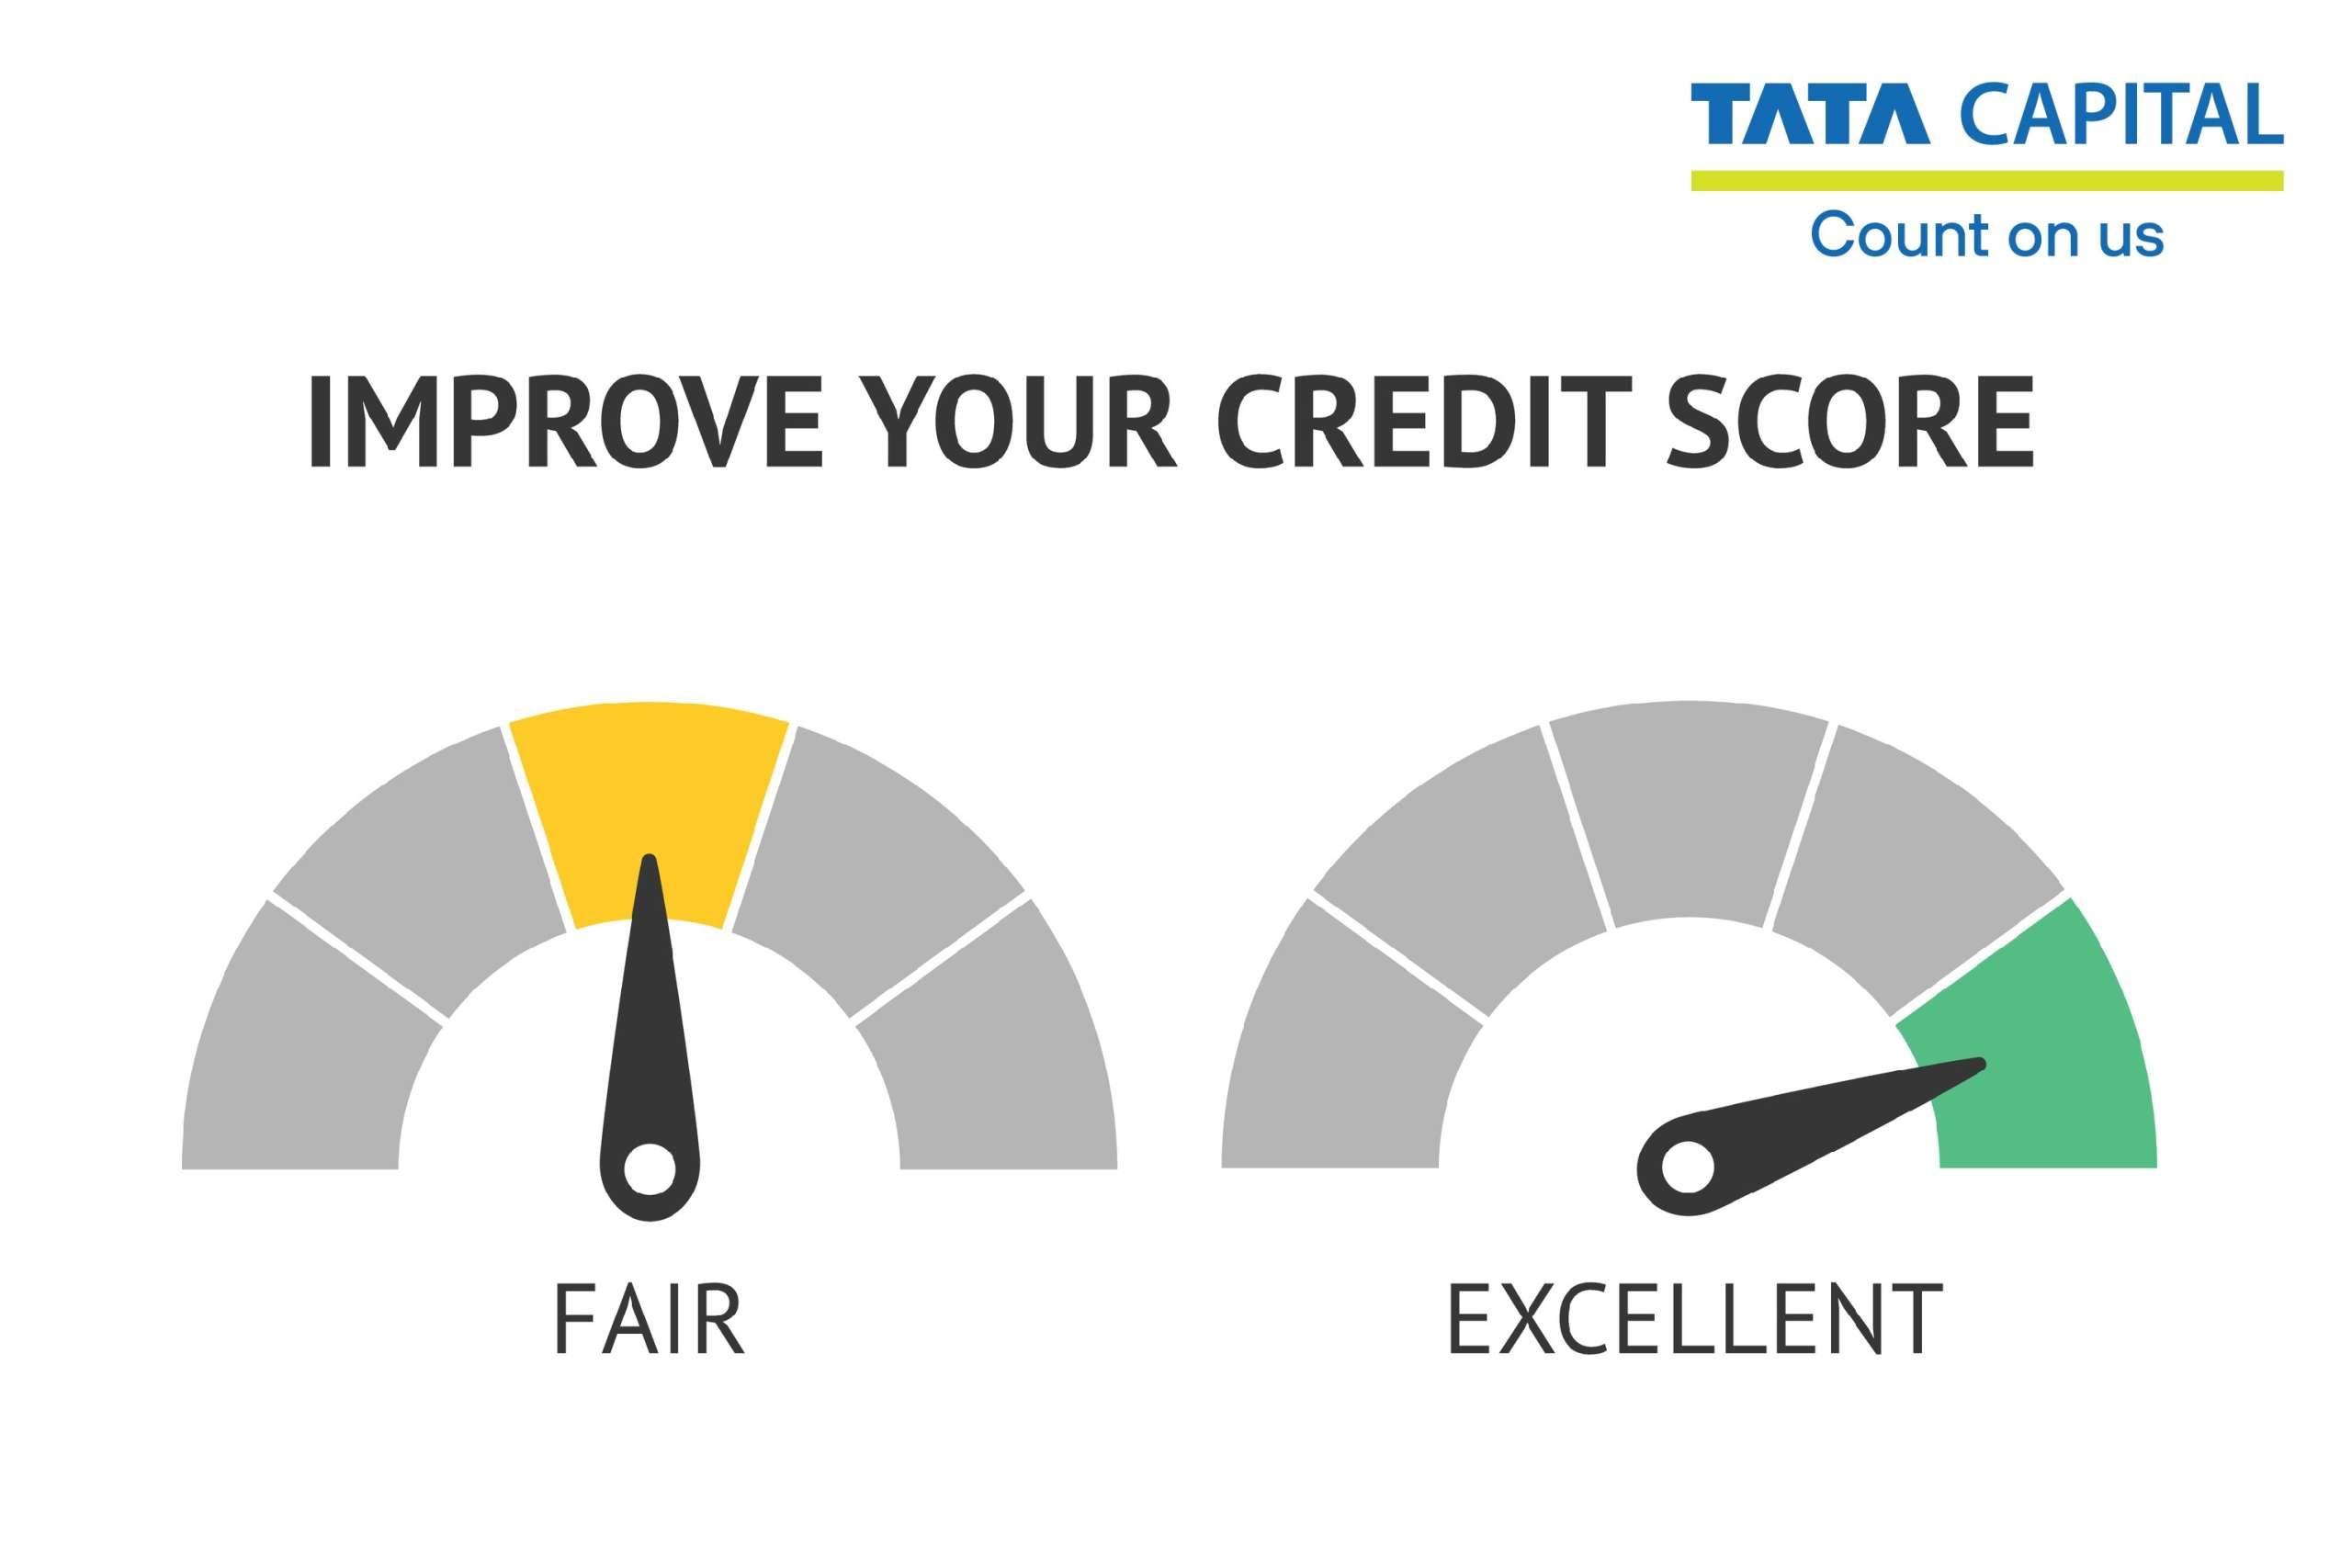 Tips for Improving Credit Score Before Applying for a Home Loan